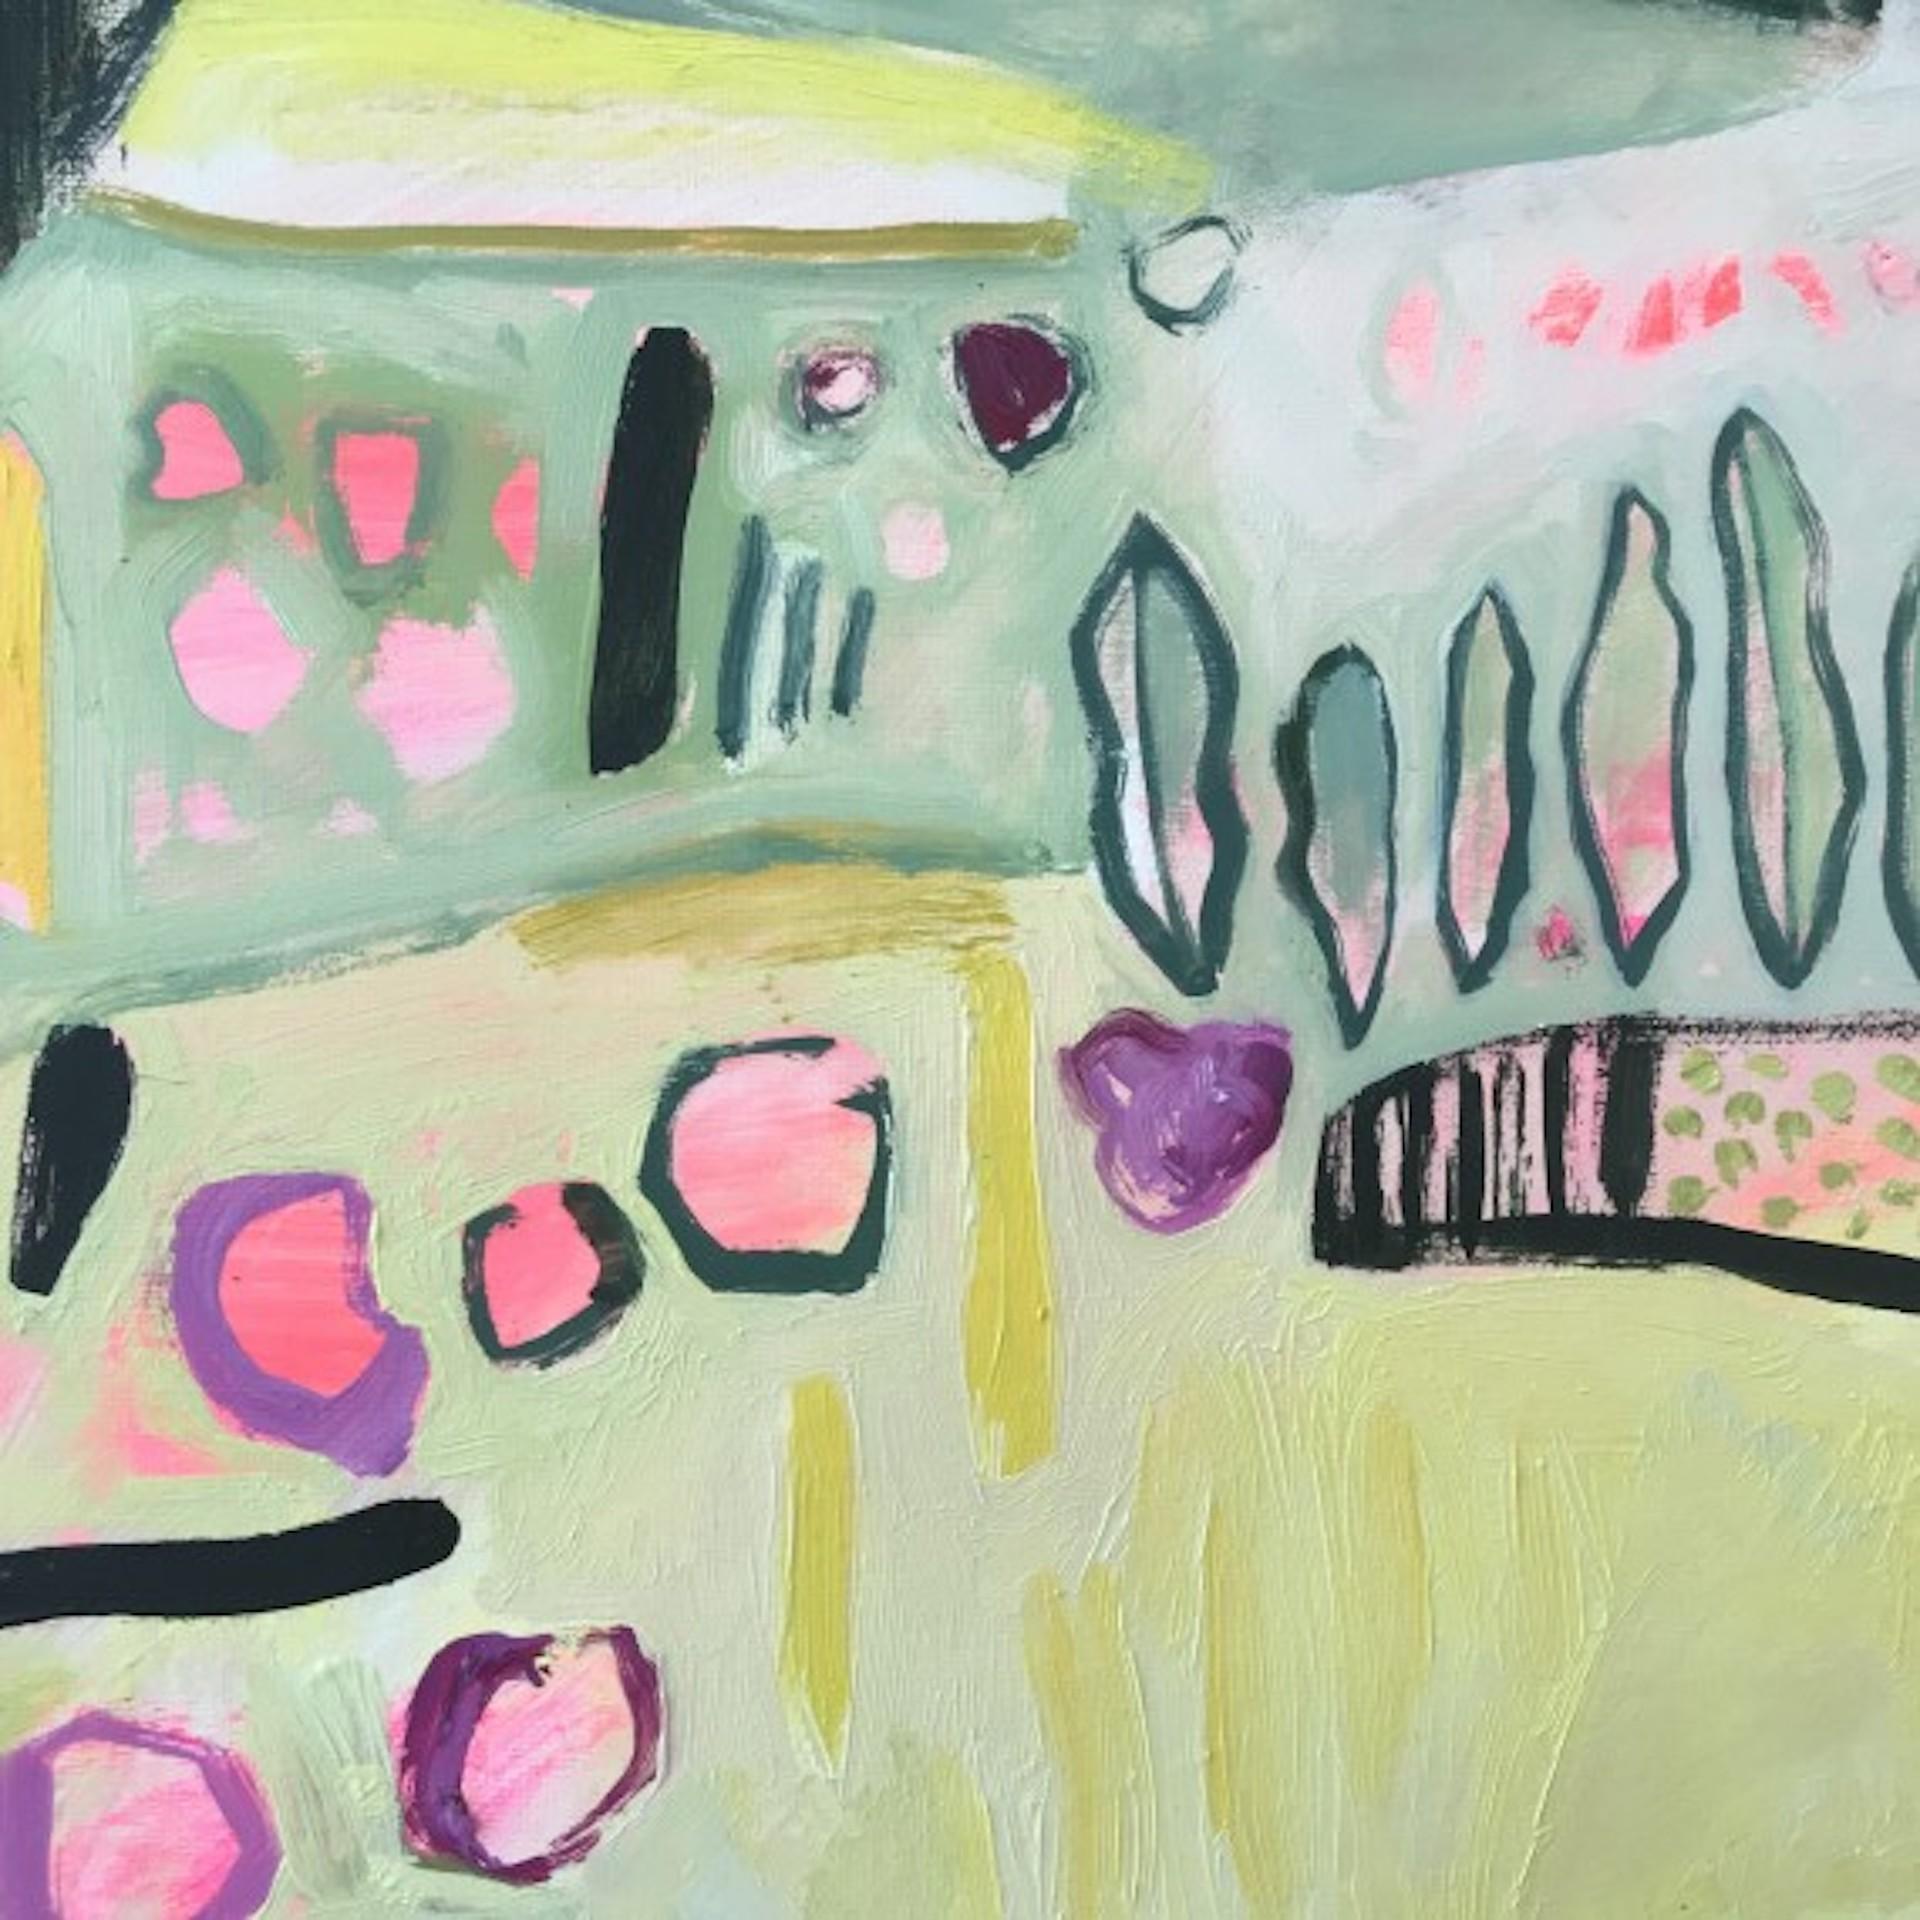 Pink, Yellow and Purple in the Merton Borders [2019]
Original
Landscapes 
Oil and acrylic on canvas
Image size: H:100 cm x W:100 cm
Complete Size of Unframed Work: H:100 cm x W:100 cm x D:3.5cm
Framed Size: H:102 cm x W:102 cm x D:4cm
Sold